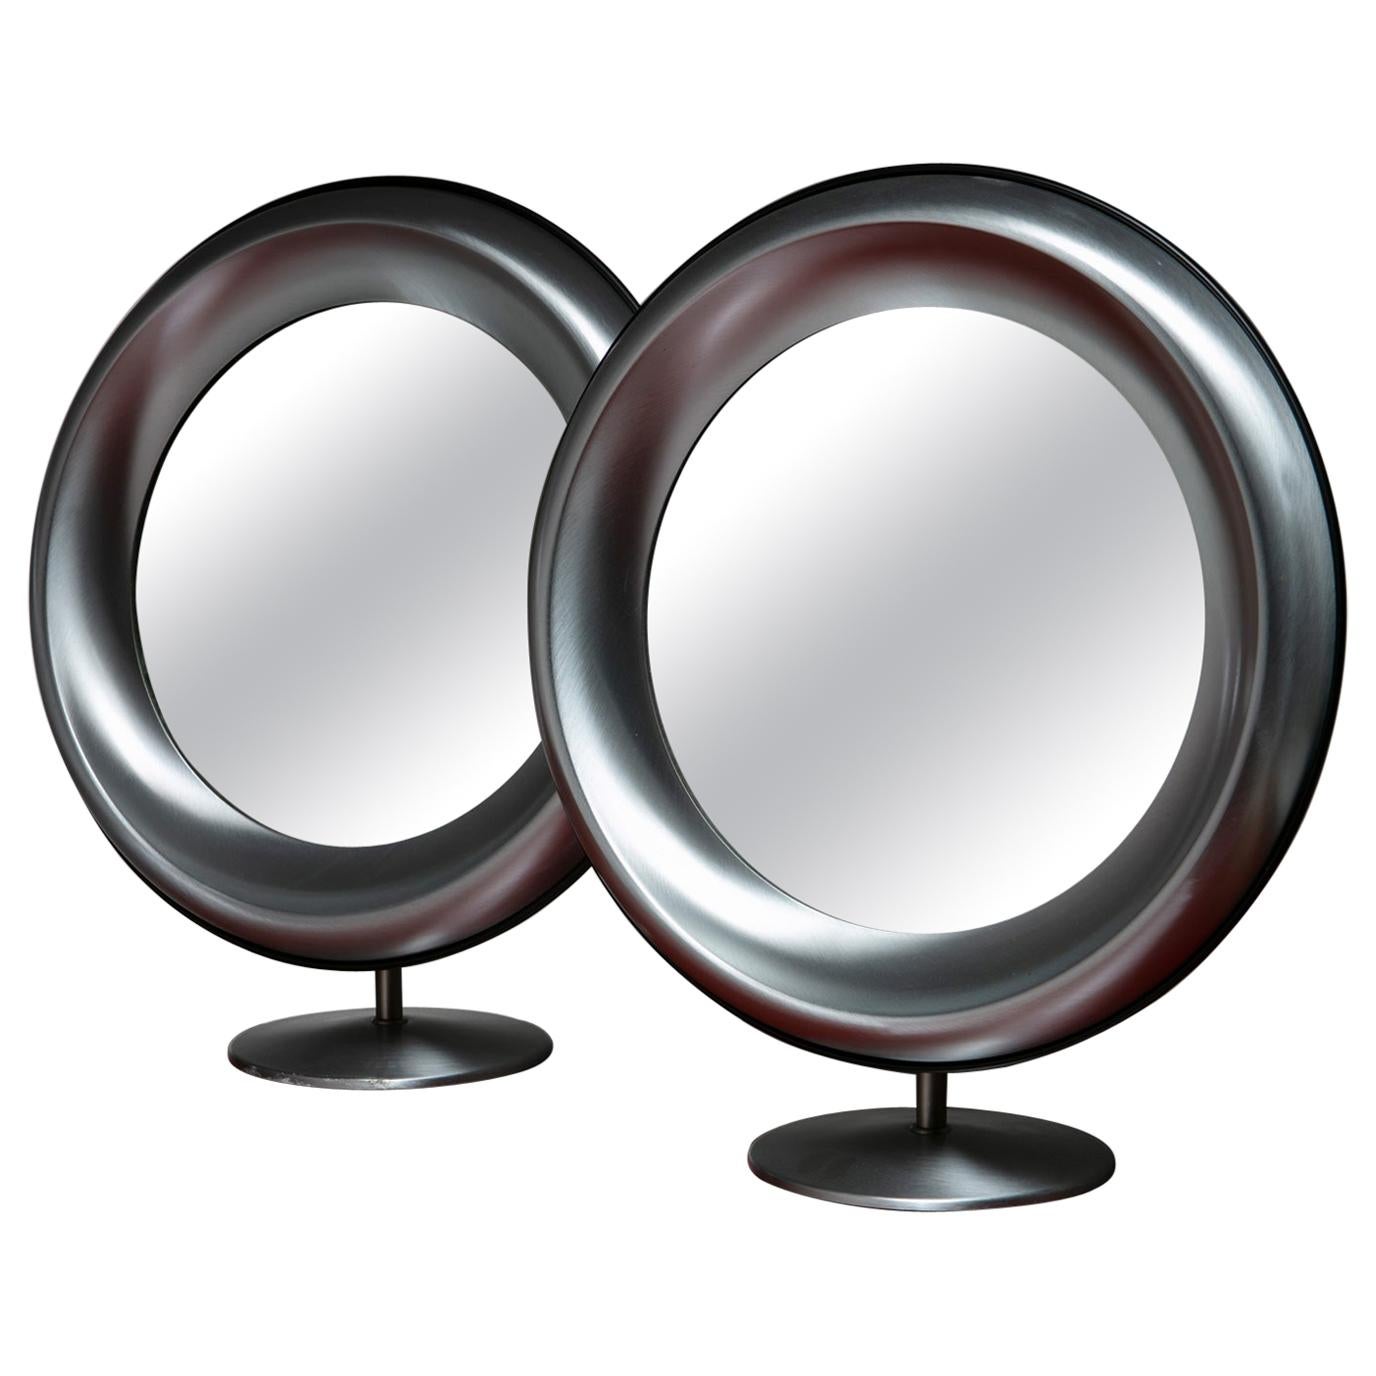 Set of Two Adjustable Table Mirrors by Missaglia, Italy, 1970s